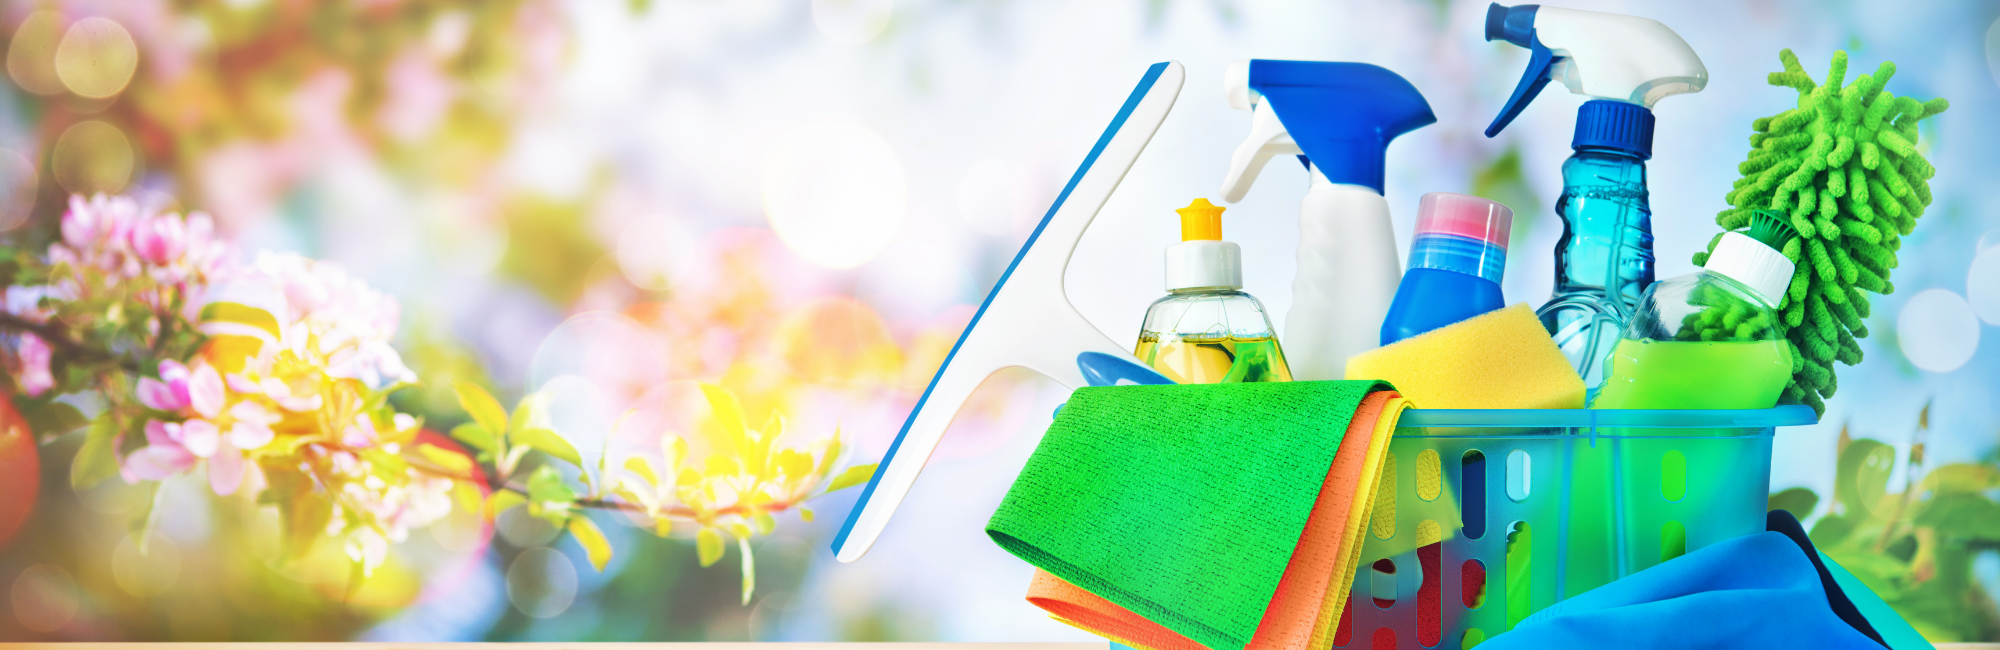 Cleaning supplies - Valex Federal Credit Union